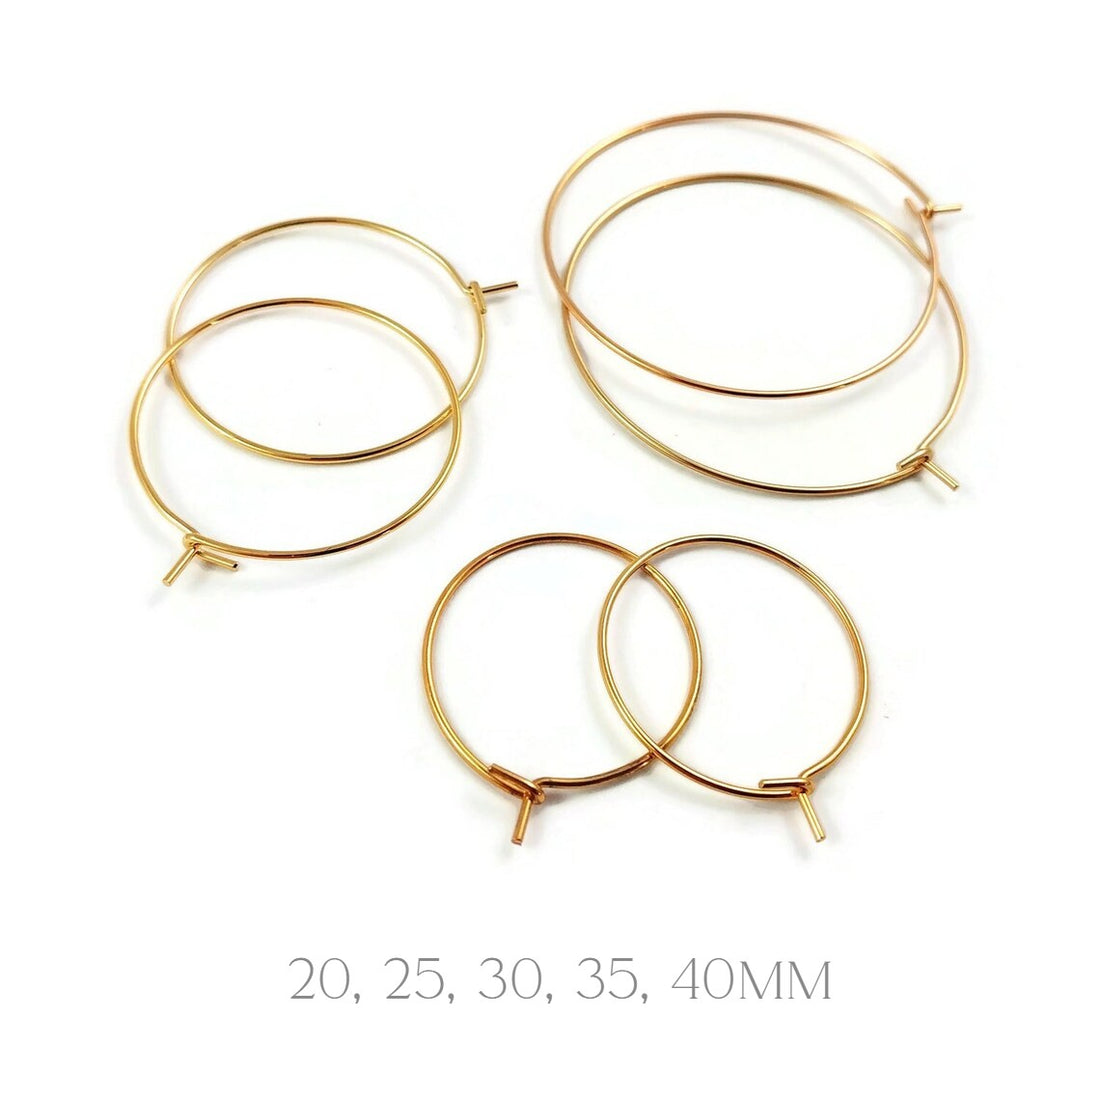 10 Gold stainless steel hoops - Five sizes available